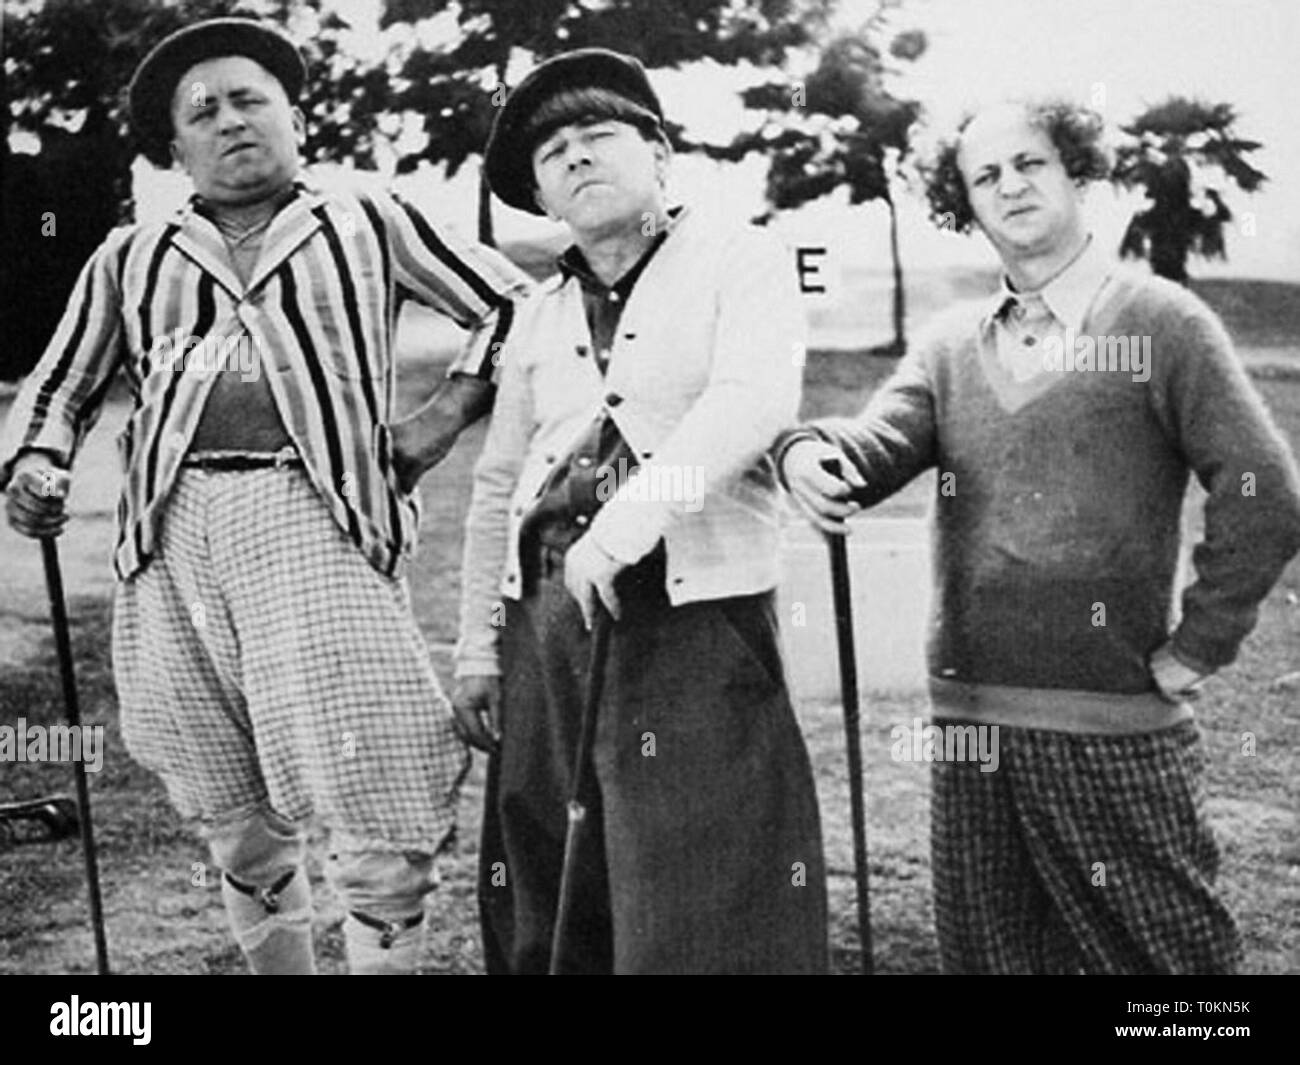 1940Over half a century since their last short film was released, the Three Stooges remain popular with audiences. Their films have never left American television since first appearing in 1958, and they continue to delight old fans while attracting new viewers. They were a hard-working group of comedians who were never the critics' darlings, a durable act who endured several personnel changes in their careers that would have permanently sidelined a less persistent act. Credit: Hollywood Photo Archive / MediaPunch Stock Photo